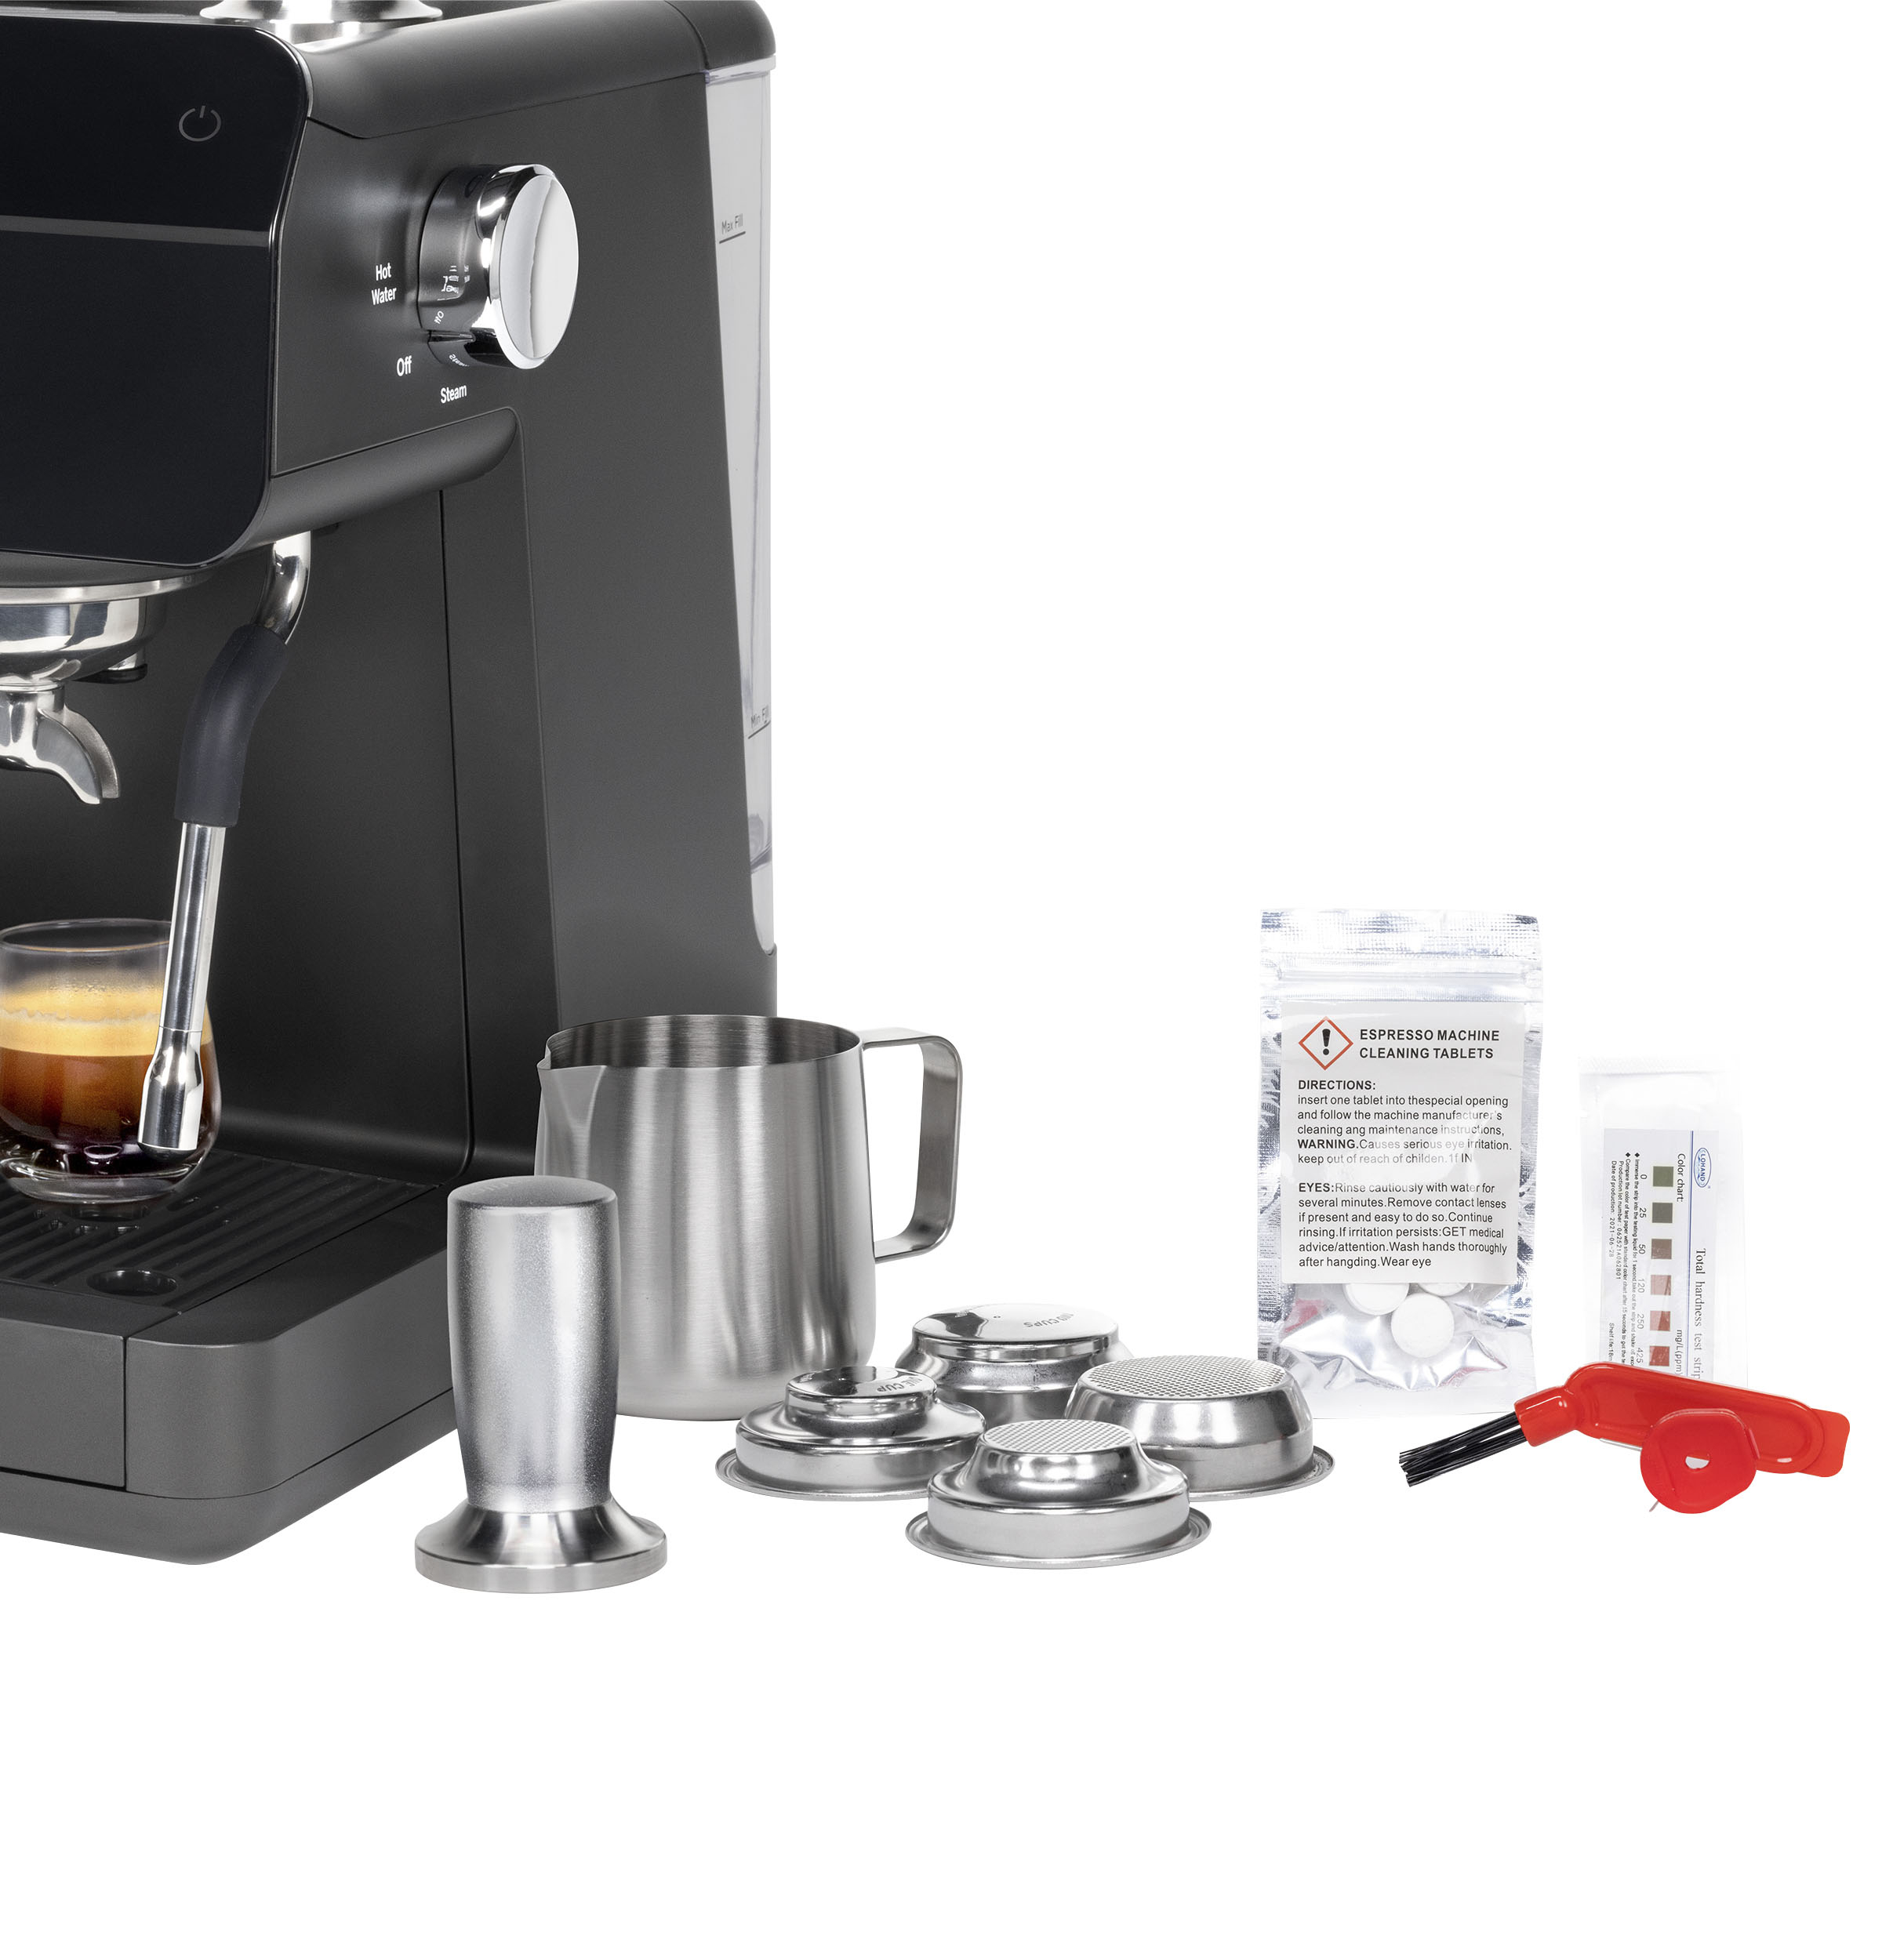 ego Compliment heel GE Profile Semi-Automatic Espresso Machine with 15 bars of pressure, Milk  Frother, and Built-In Wi-Fi Black P7CESAS6RBB - Best Buy